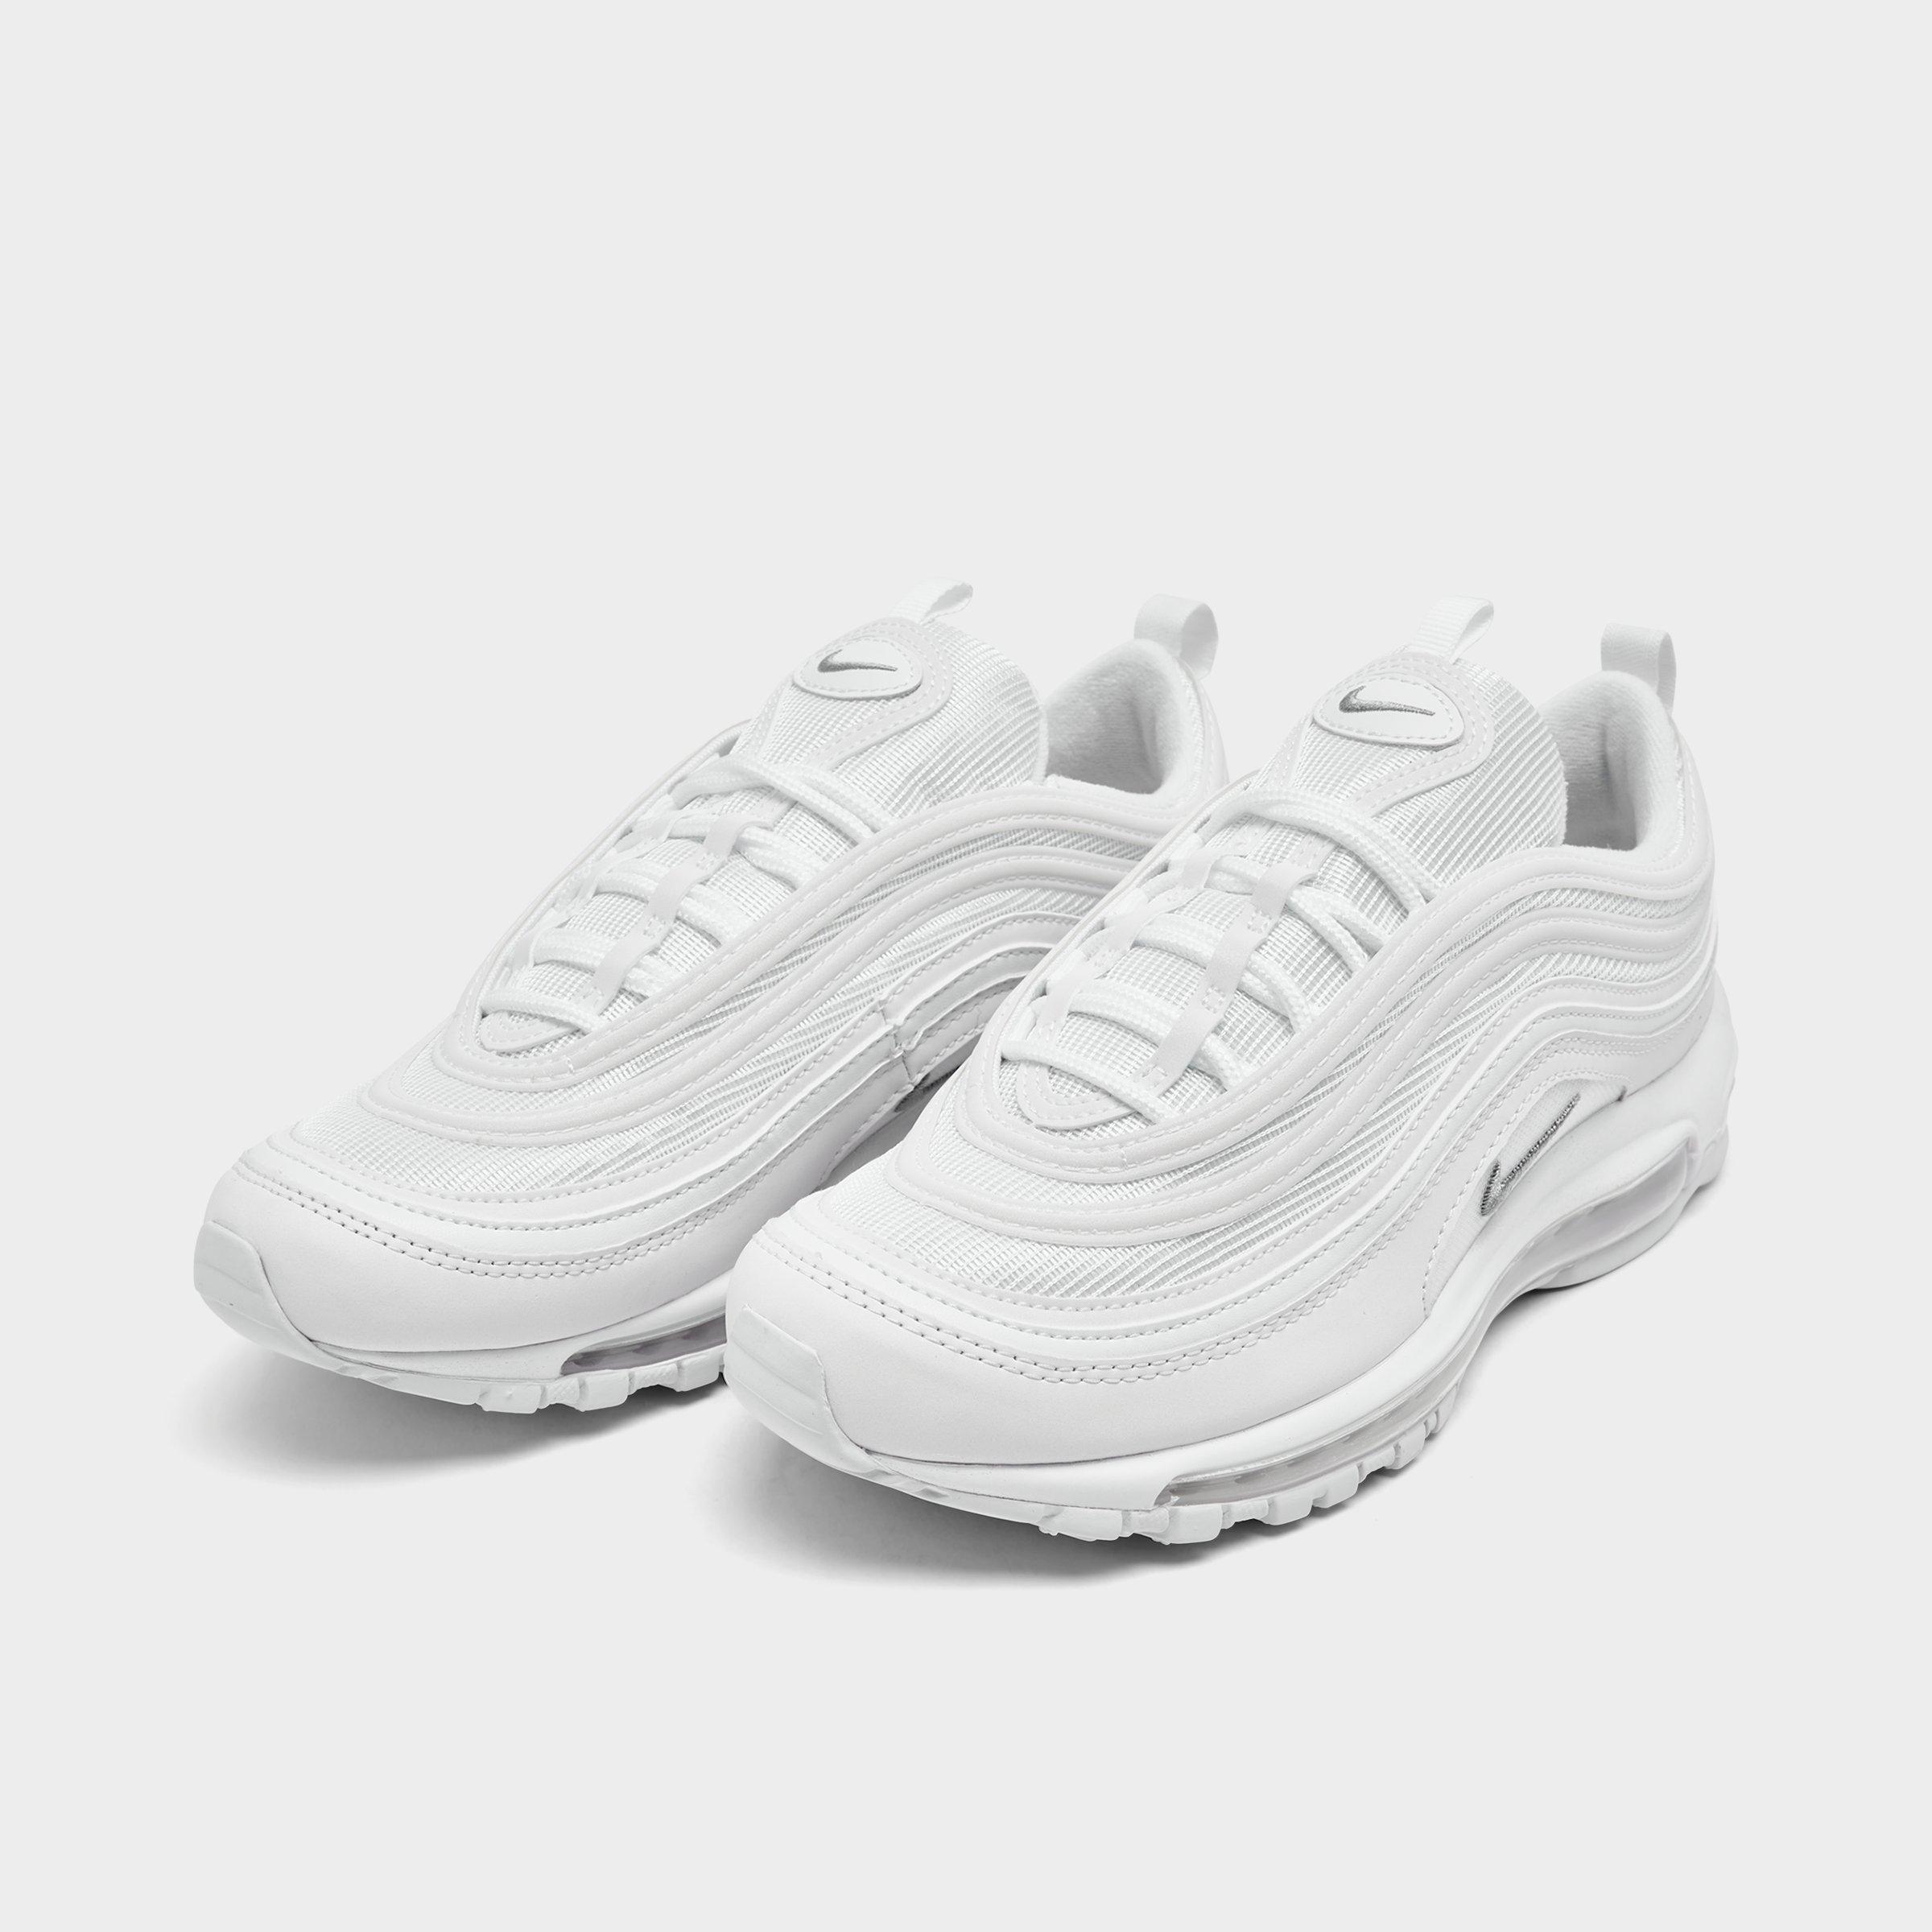 Men's Nike Air Max 97 Casual Shoes| Finish Line